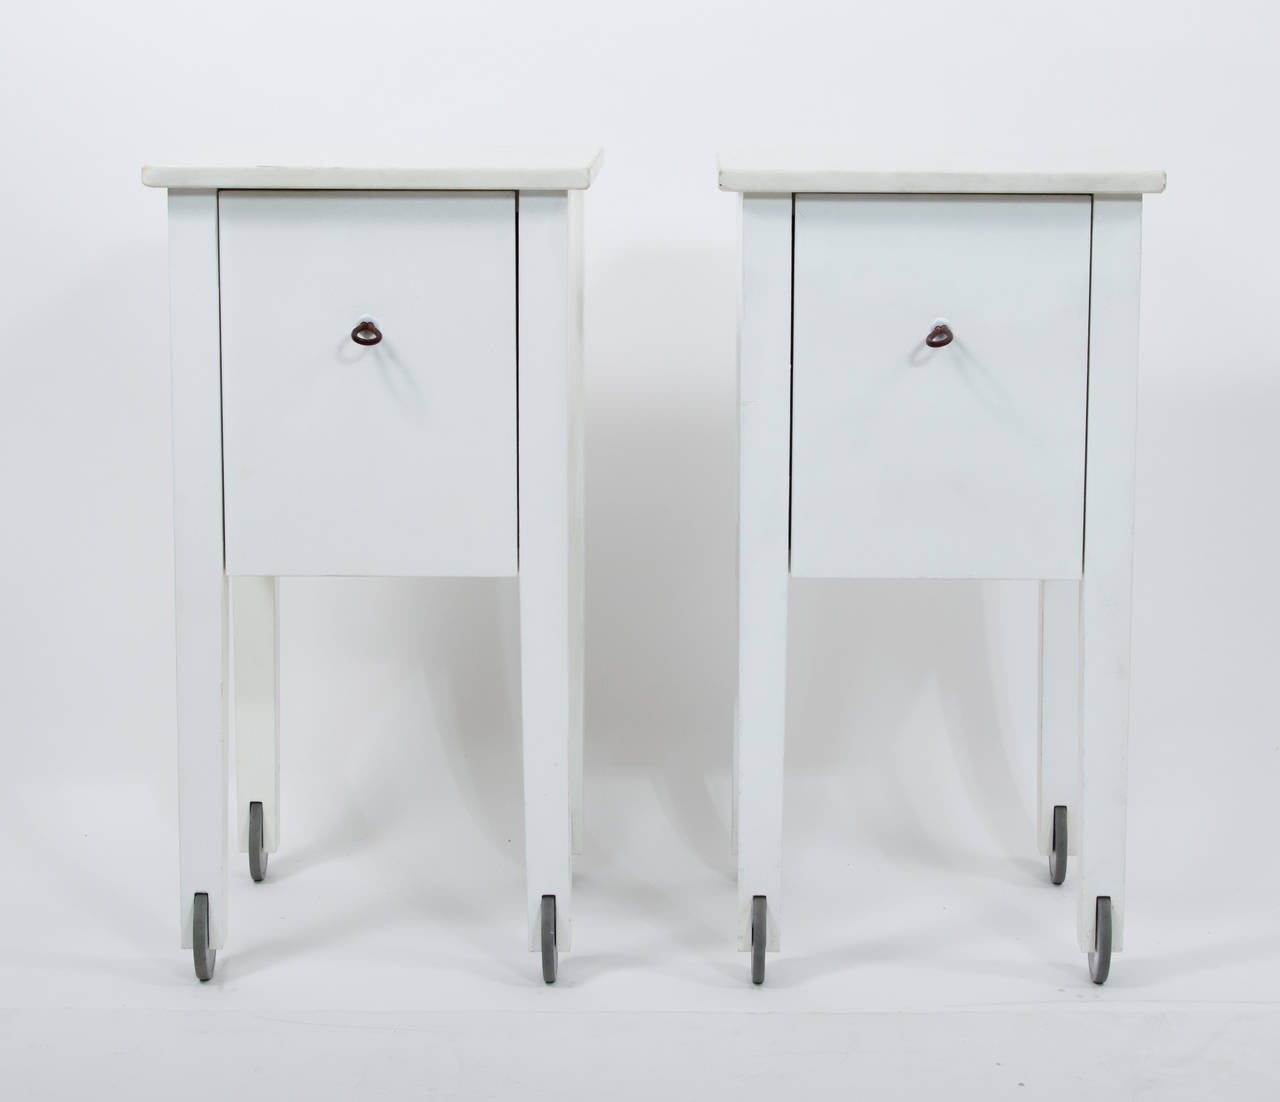 Pair of nightstands designed by Philippe Starck,
for Ian Schrager's Delano Hotel,
featuring Carrara marble tops,
Dimensions: 12.75